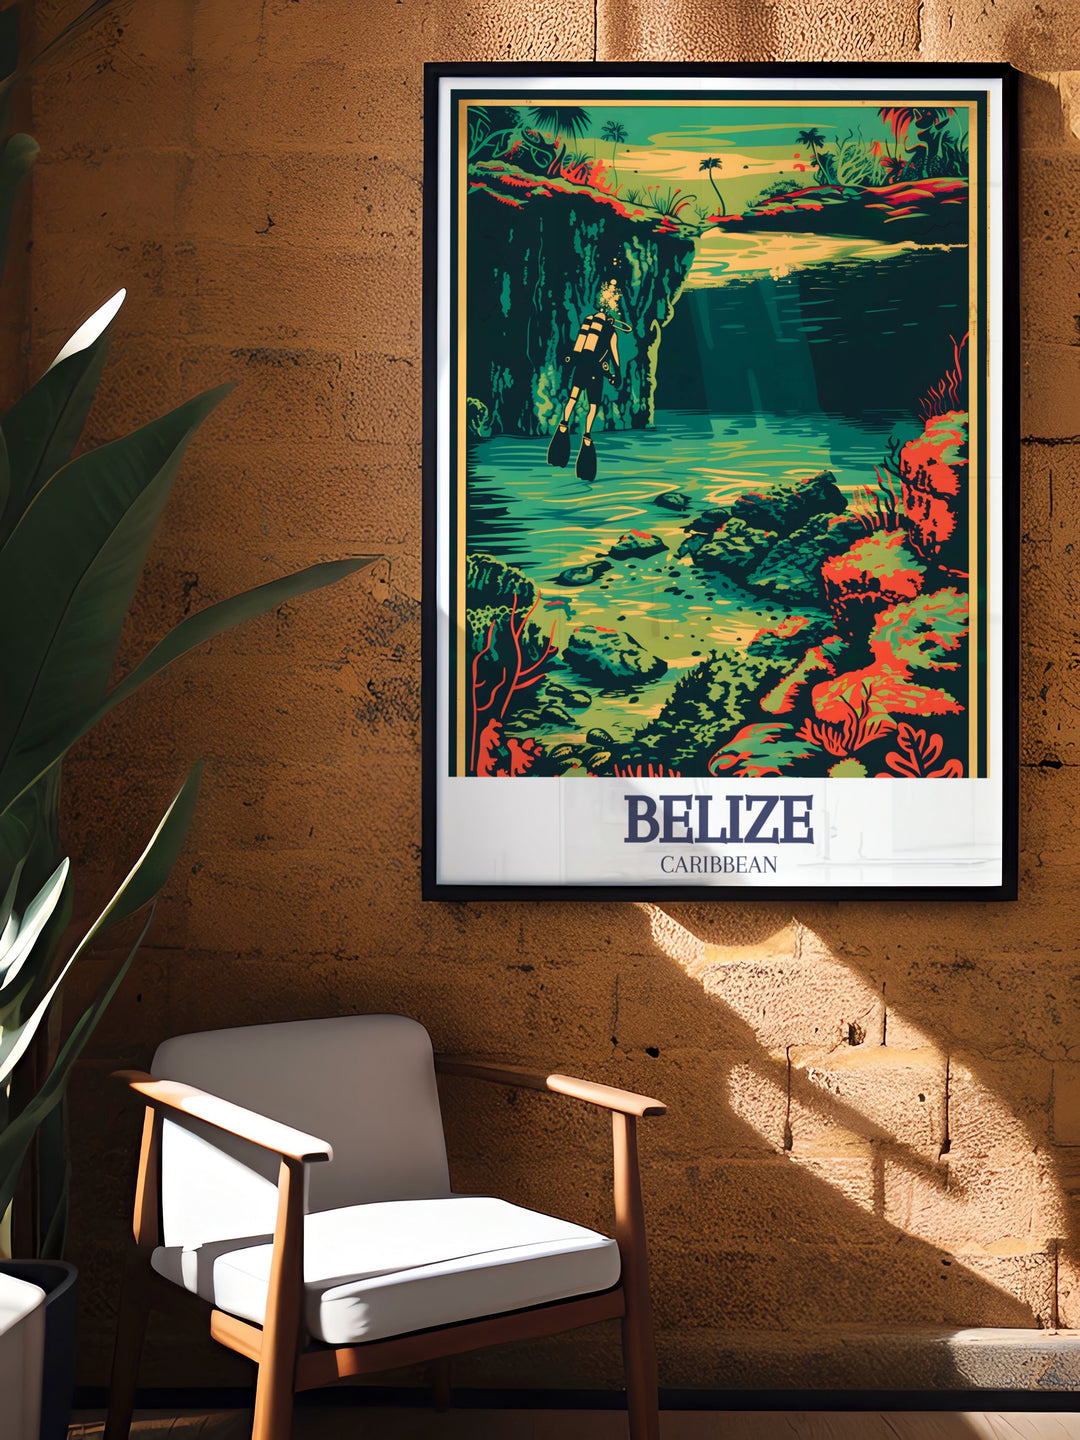 Blue Hole Belize Barrier Reef poster offering a captivating glimpse into the diverse and beautiful ecosystem of the Caribbean ideal for creating a relaxing and inspiring atmosphere in any room